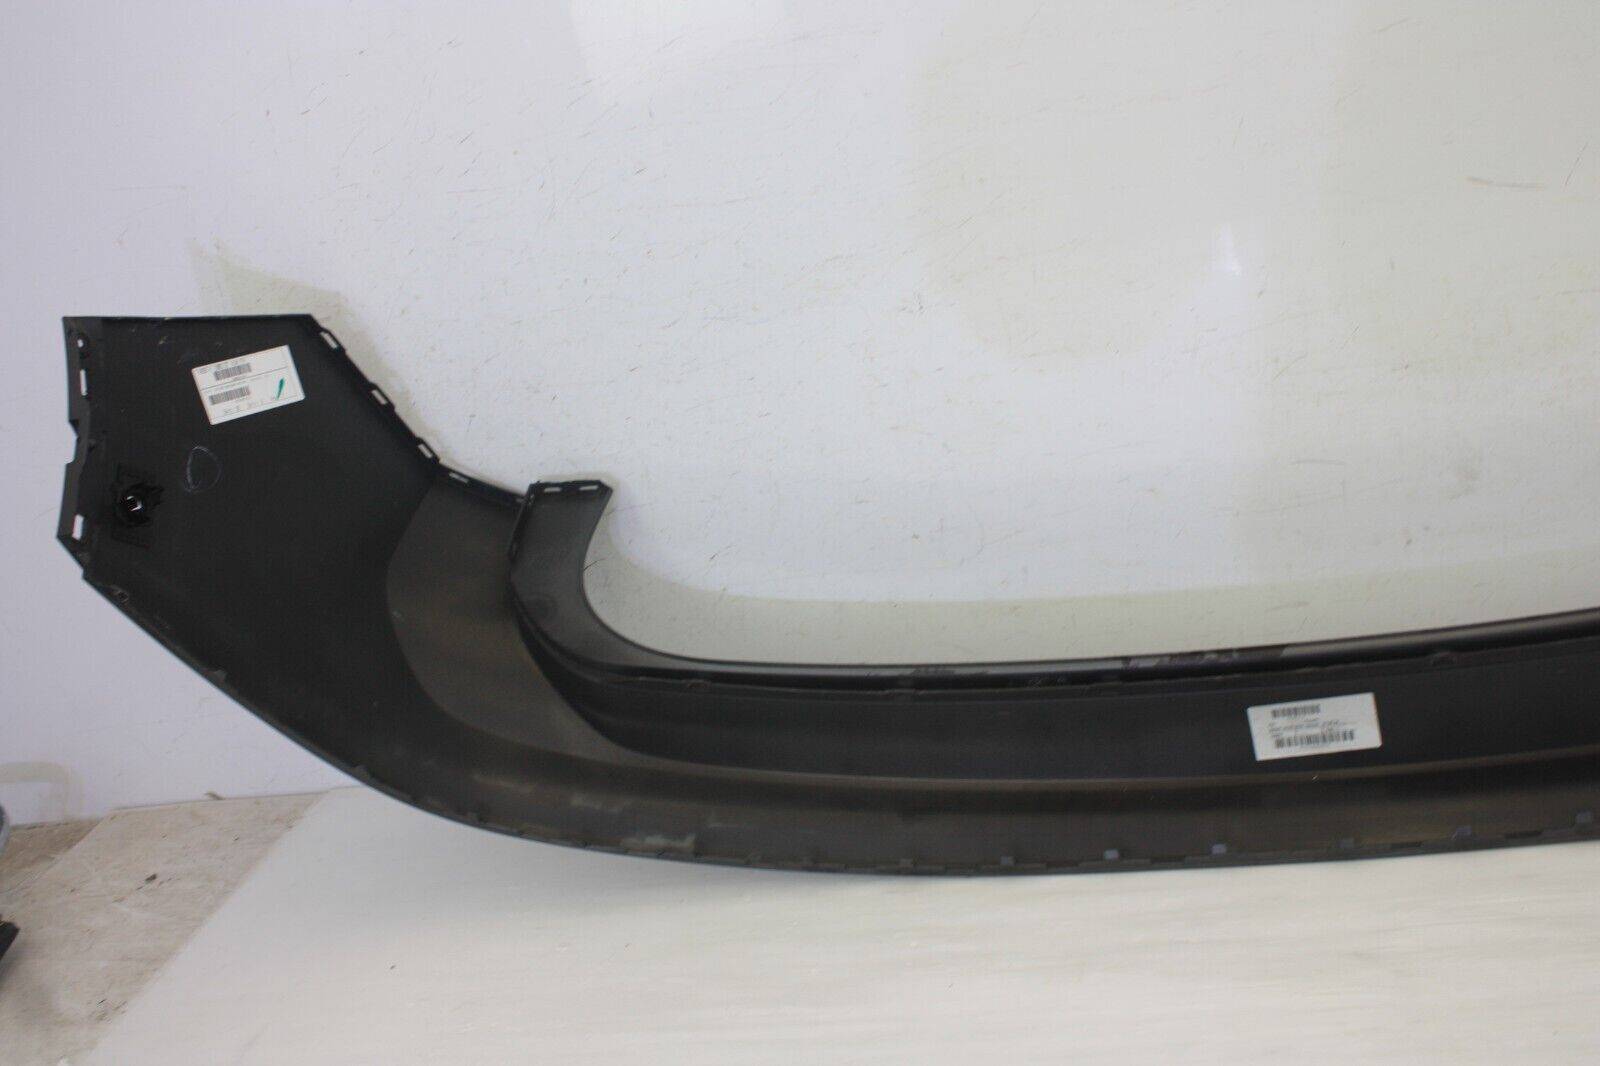 VW-Tiguan-Rear-Bumper-Upper-Section-2016-TO-2020-5NA807417-Genuine-175395257416-10